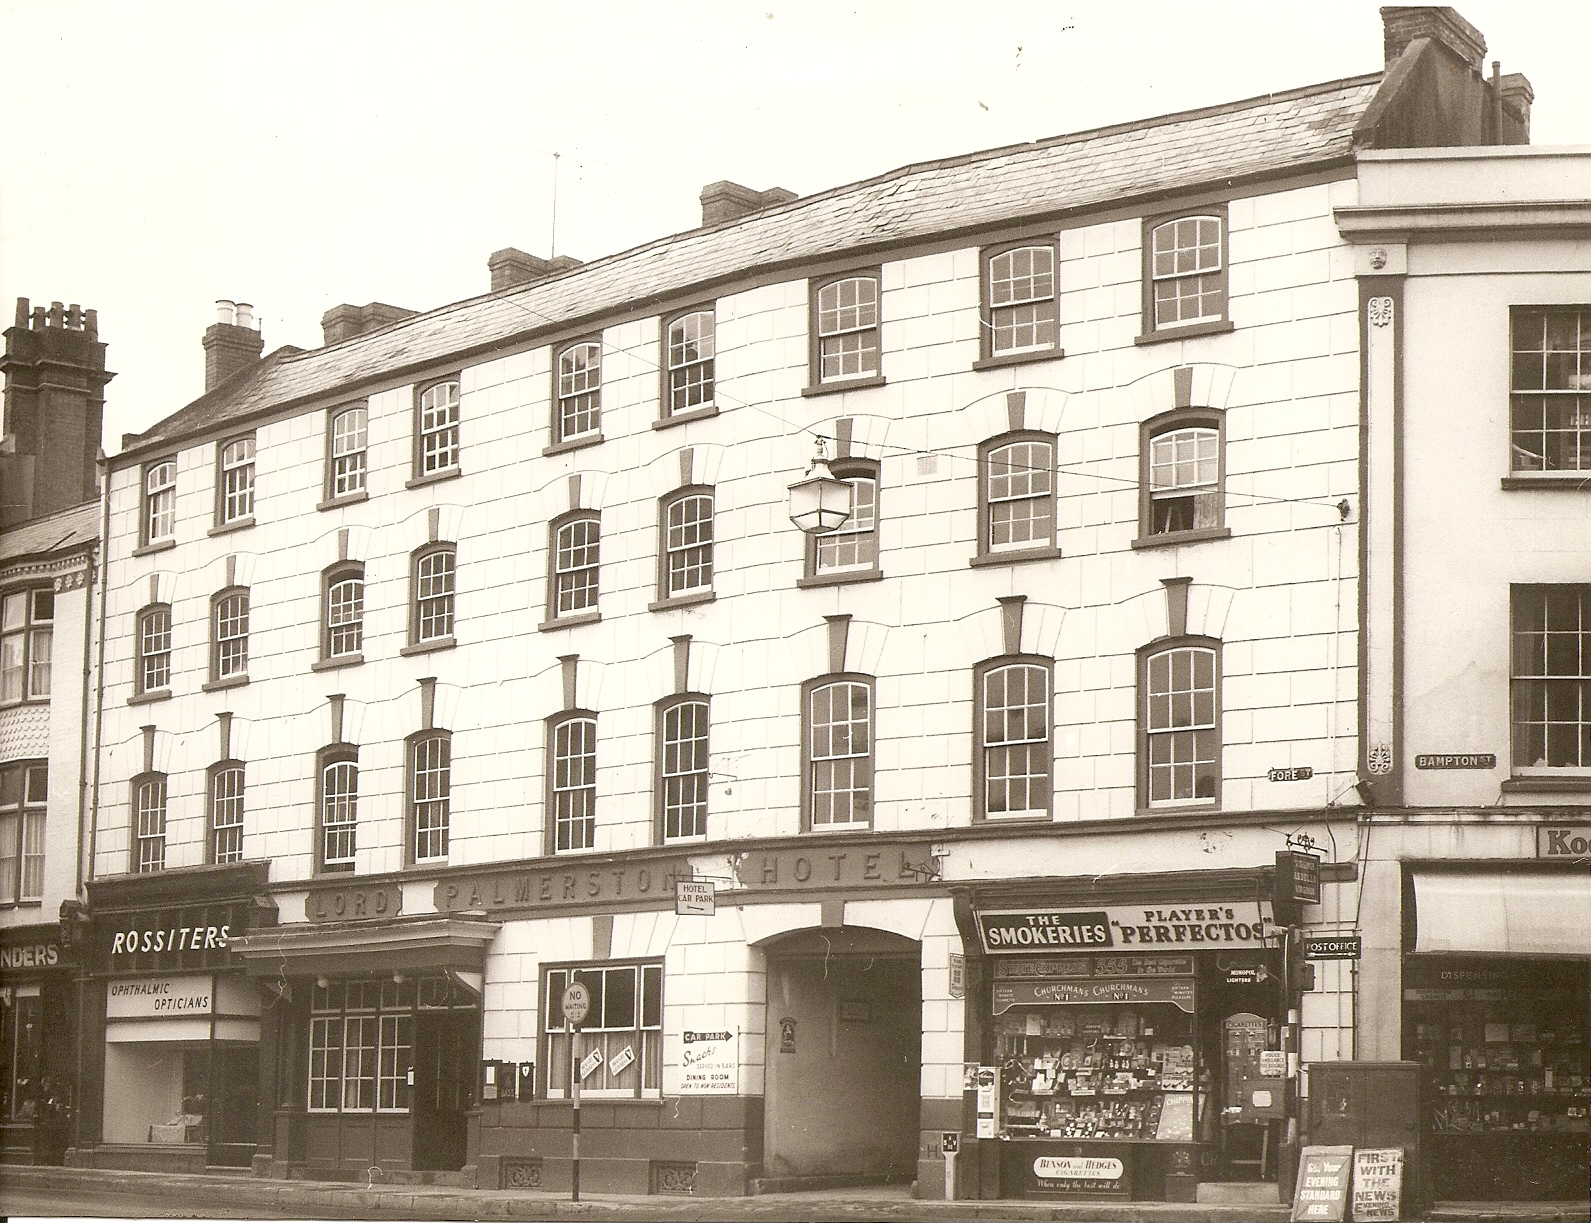 A black and white photo showing a large hotel building, Lord Palmerston Hotel. It is a white four storey building with lots of black framed windows and an entrance for an old fashioned coach and horses in the middle of the ground floor. There are also a couple of shop fronts on the ground floor to either side of the coach opening, Rossiters Opticians on the left and a tobacconist on the right.